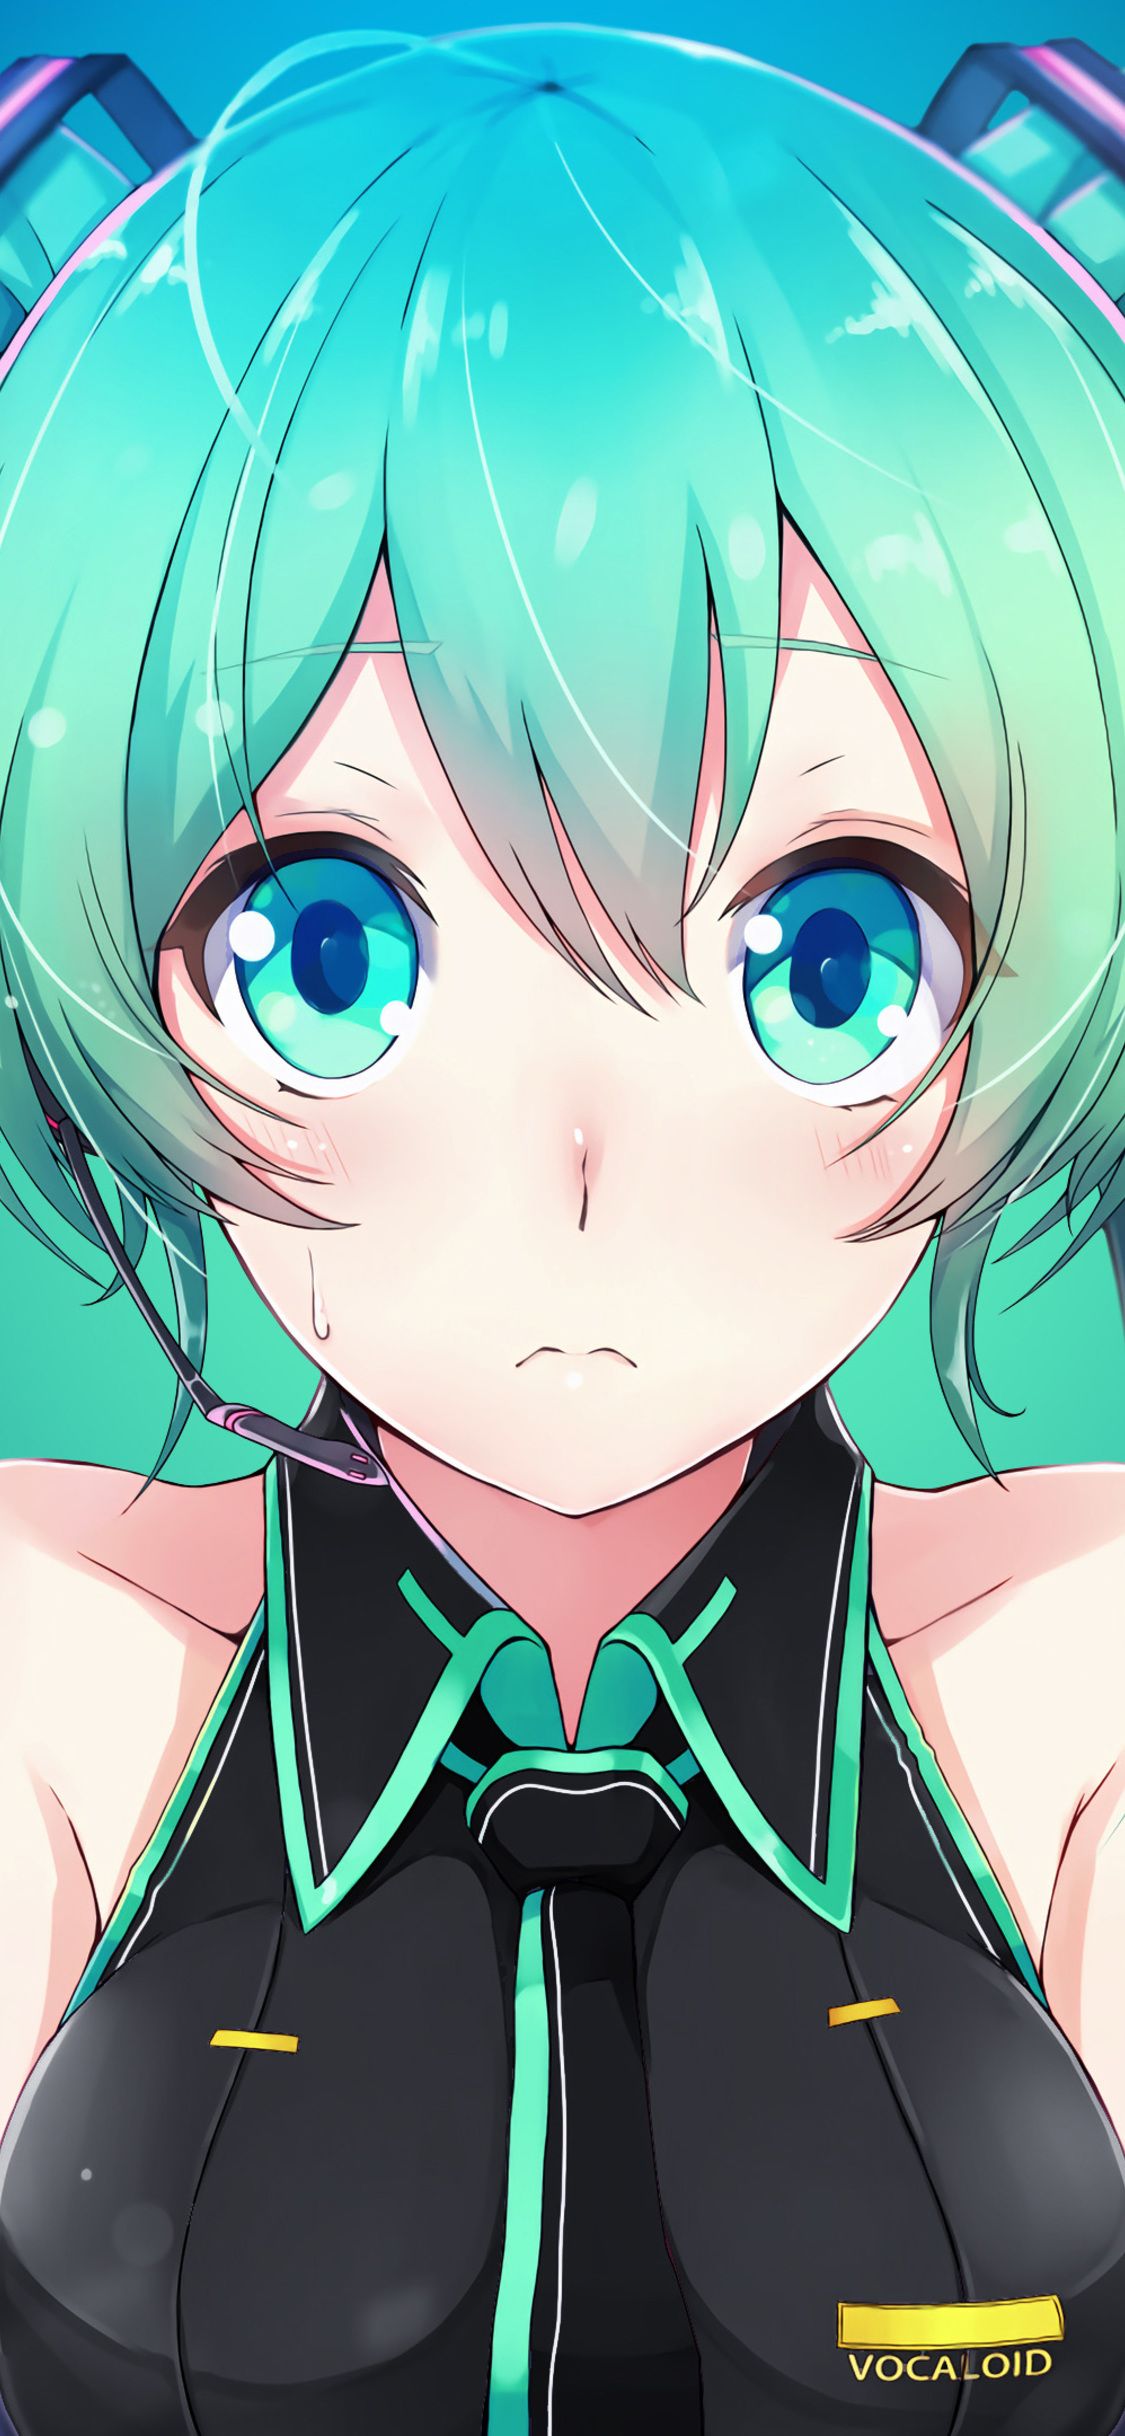 2022 Vocaloid Hatsune Miku 4k, HD Anime, 4k Wallpapers, Images,  Backgrounds, Photos and Pictures